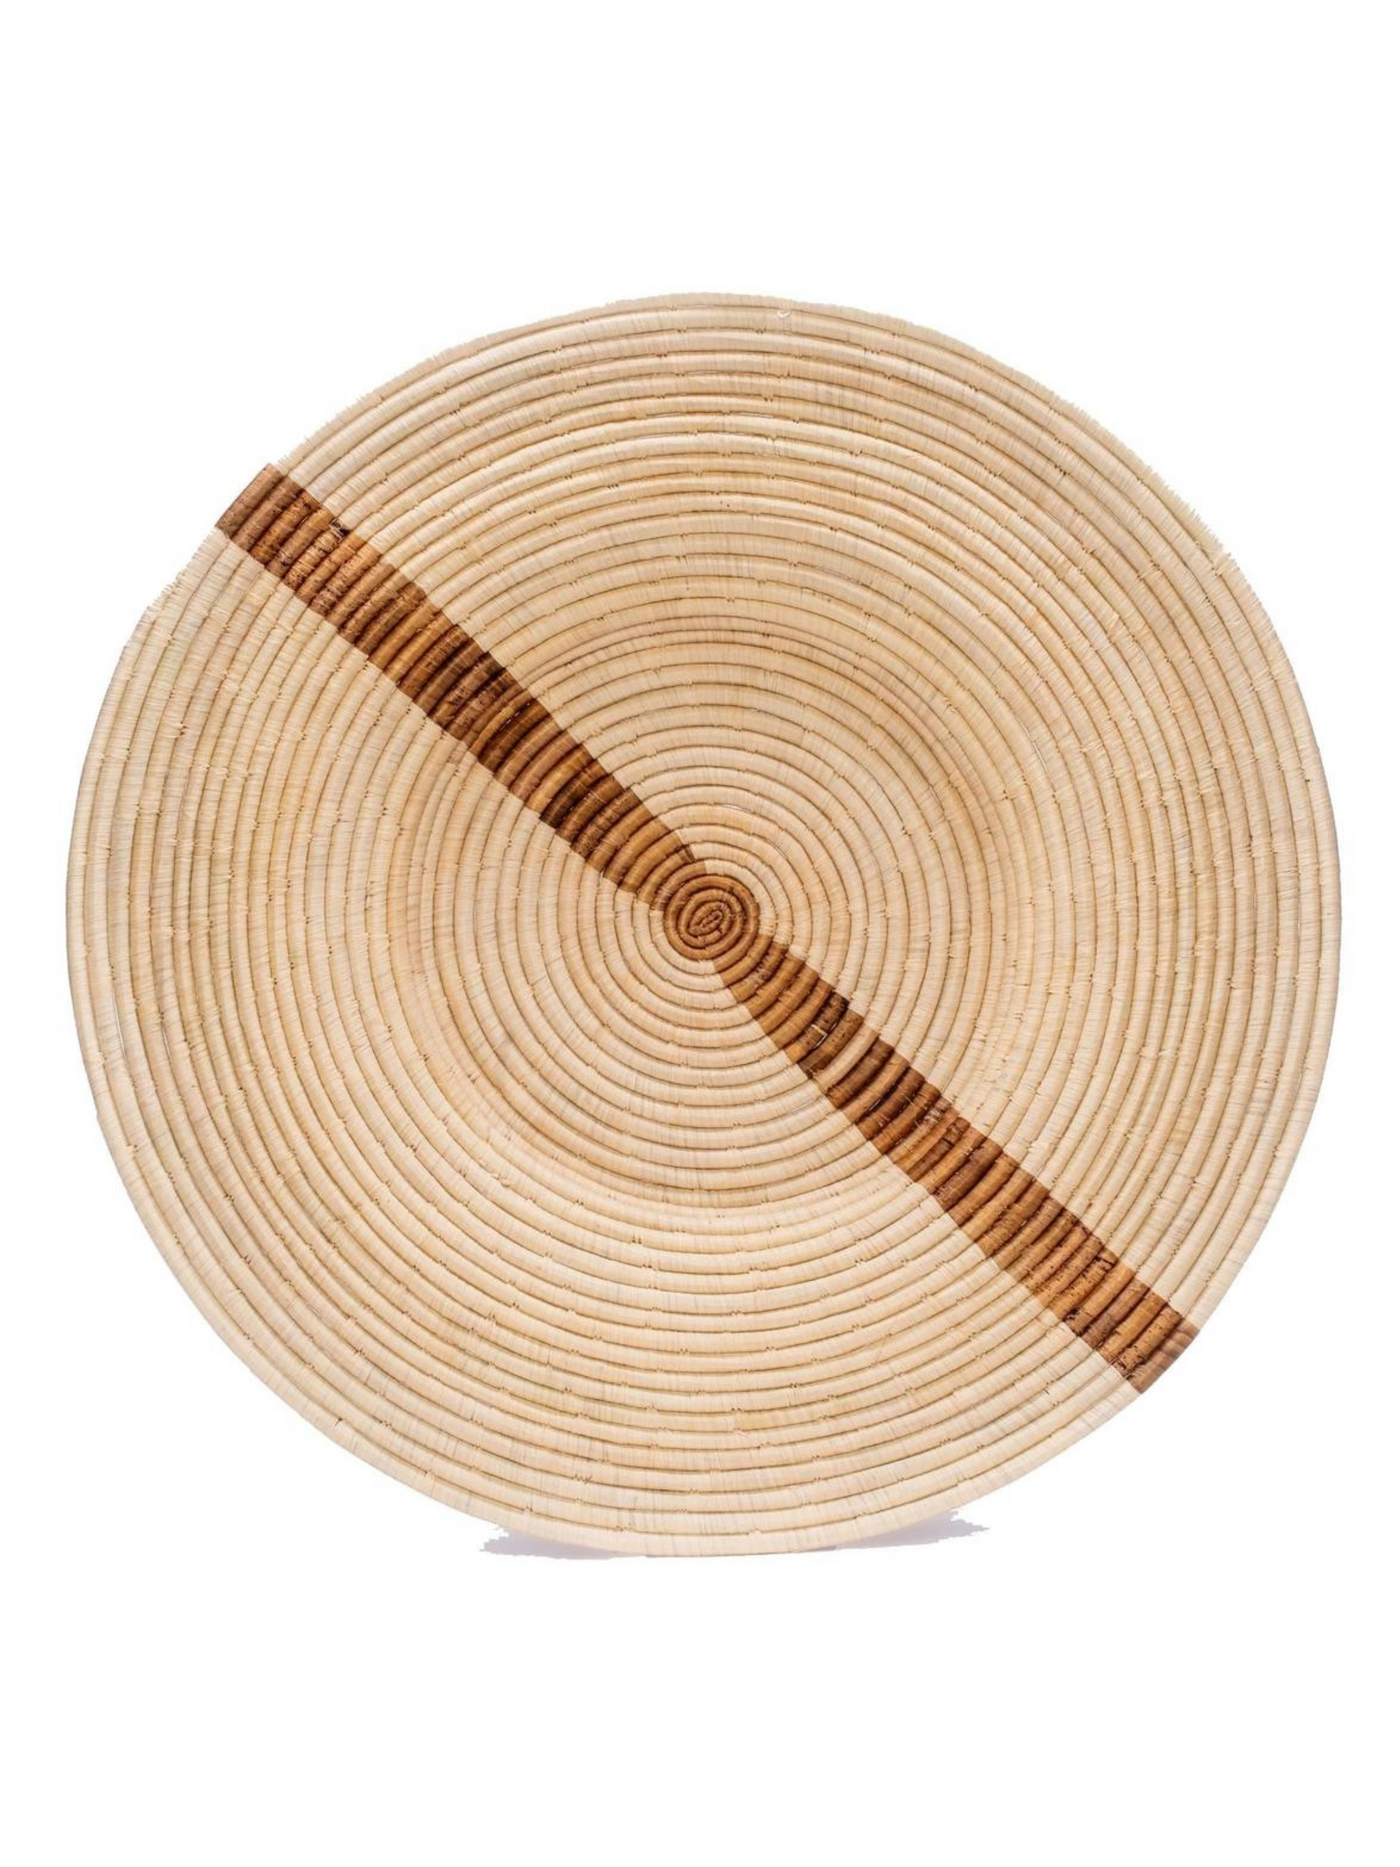 32" Jumbo Stripe Wall Art Plate (PICK UP OR LOCAL DELIVERY ONLY)